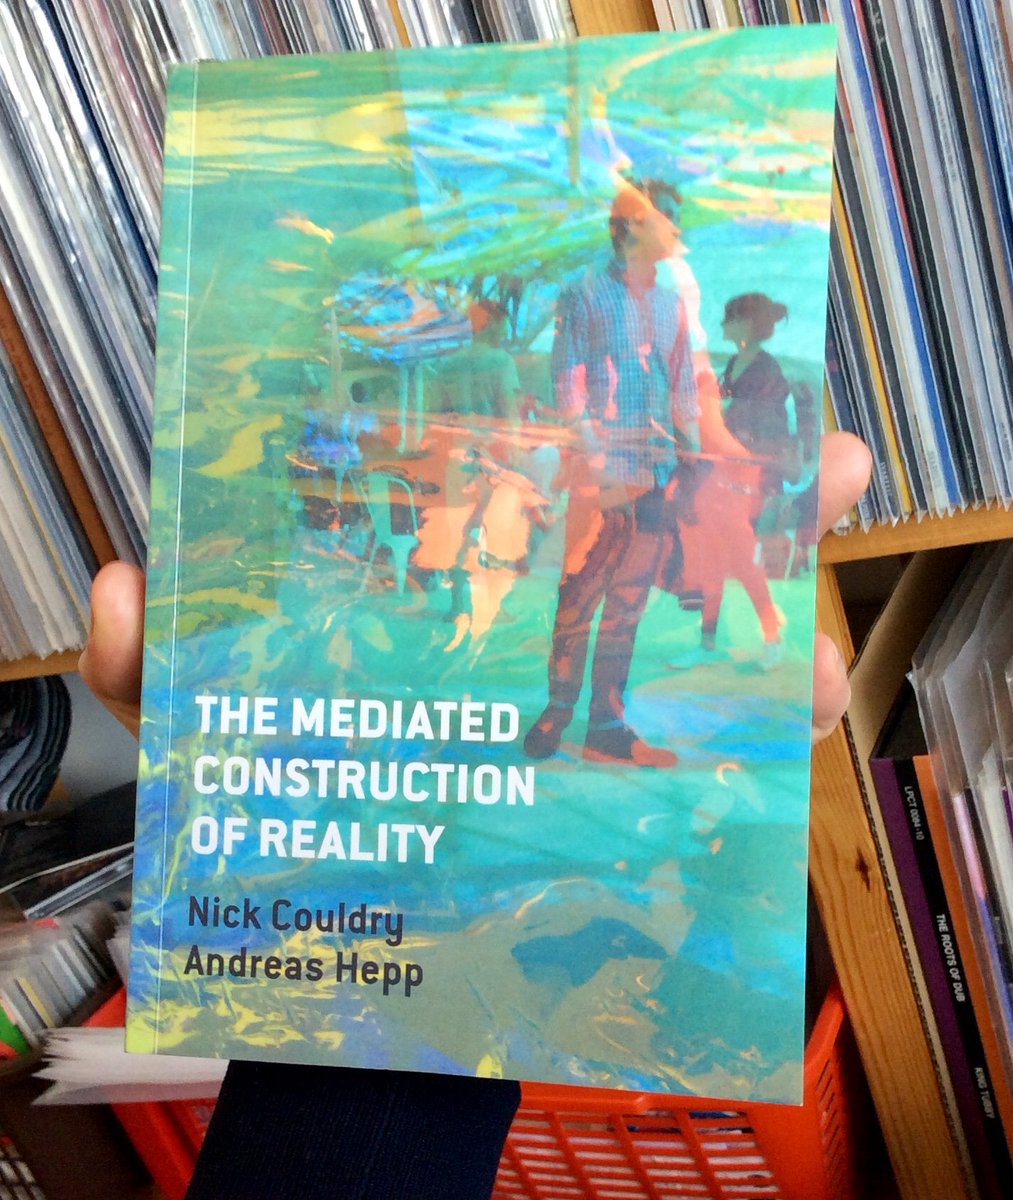 Weekend reading: Couldry & Hepp argue that social construction should be understood as mediated by technologically based media of communication from the get go (esp. so in times of deep mediatization), rather than taking everyday life outside them (or, Umwelt) as the basis.